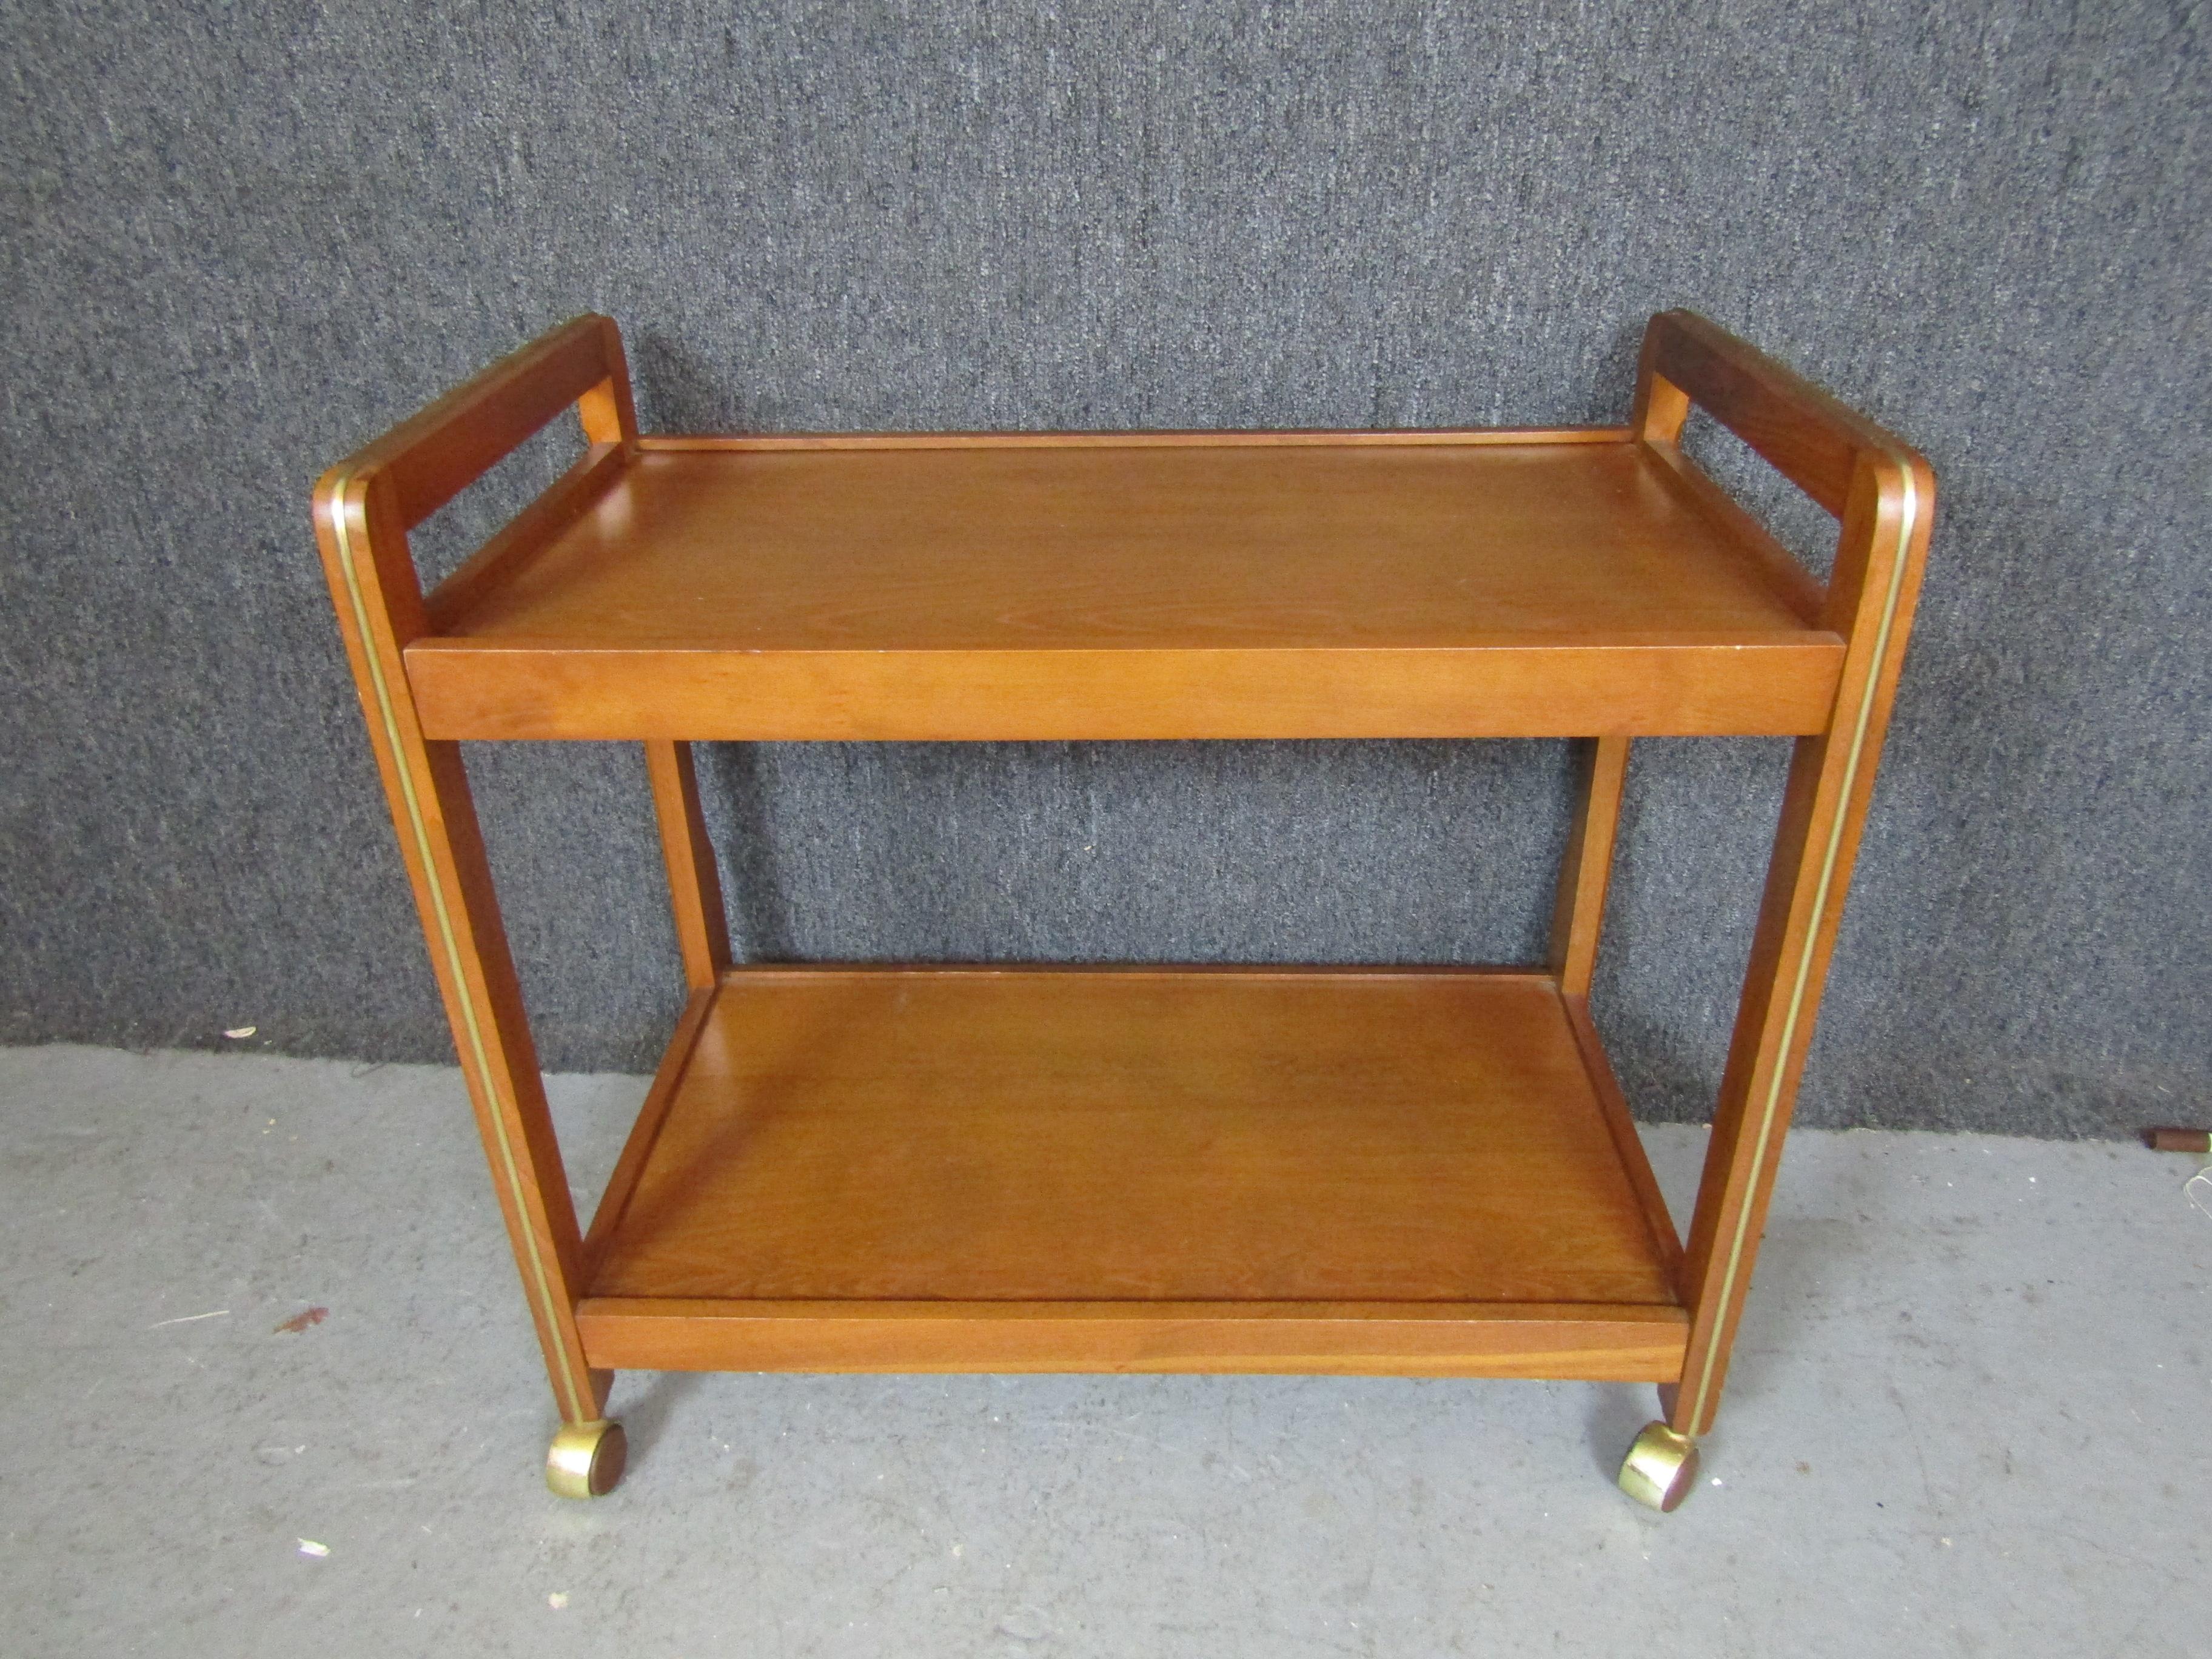 Mid-century modern rolling tea cart with brass trim around warm teak. Two shelves and wheels makes a great party bar or serving cart.
Please confirm location NY or NJ